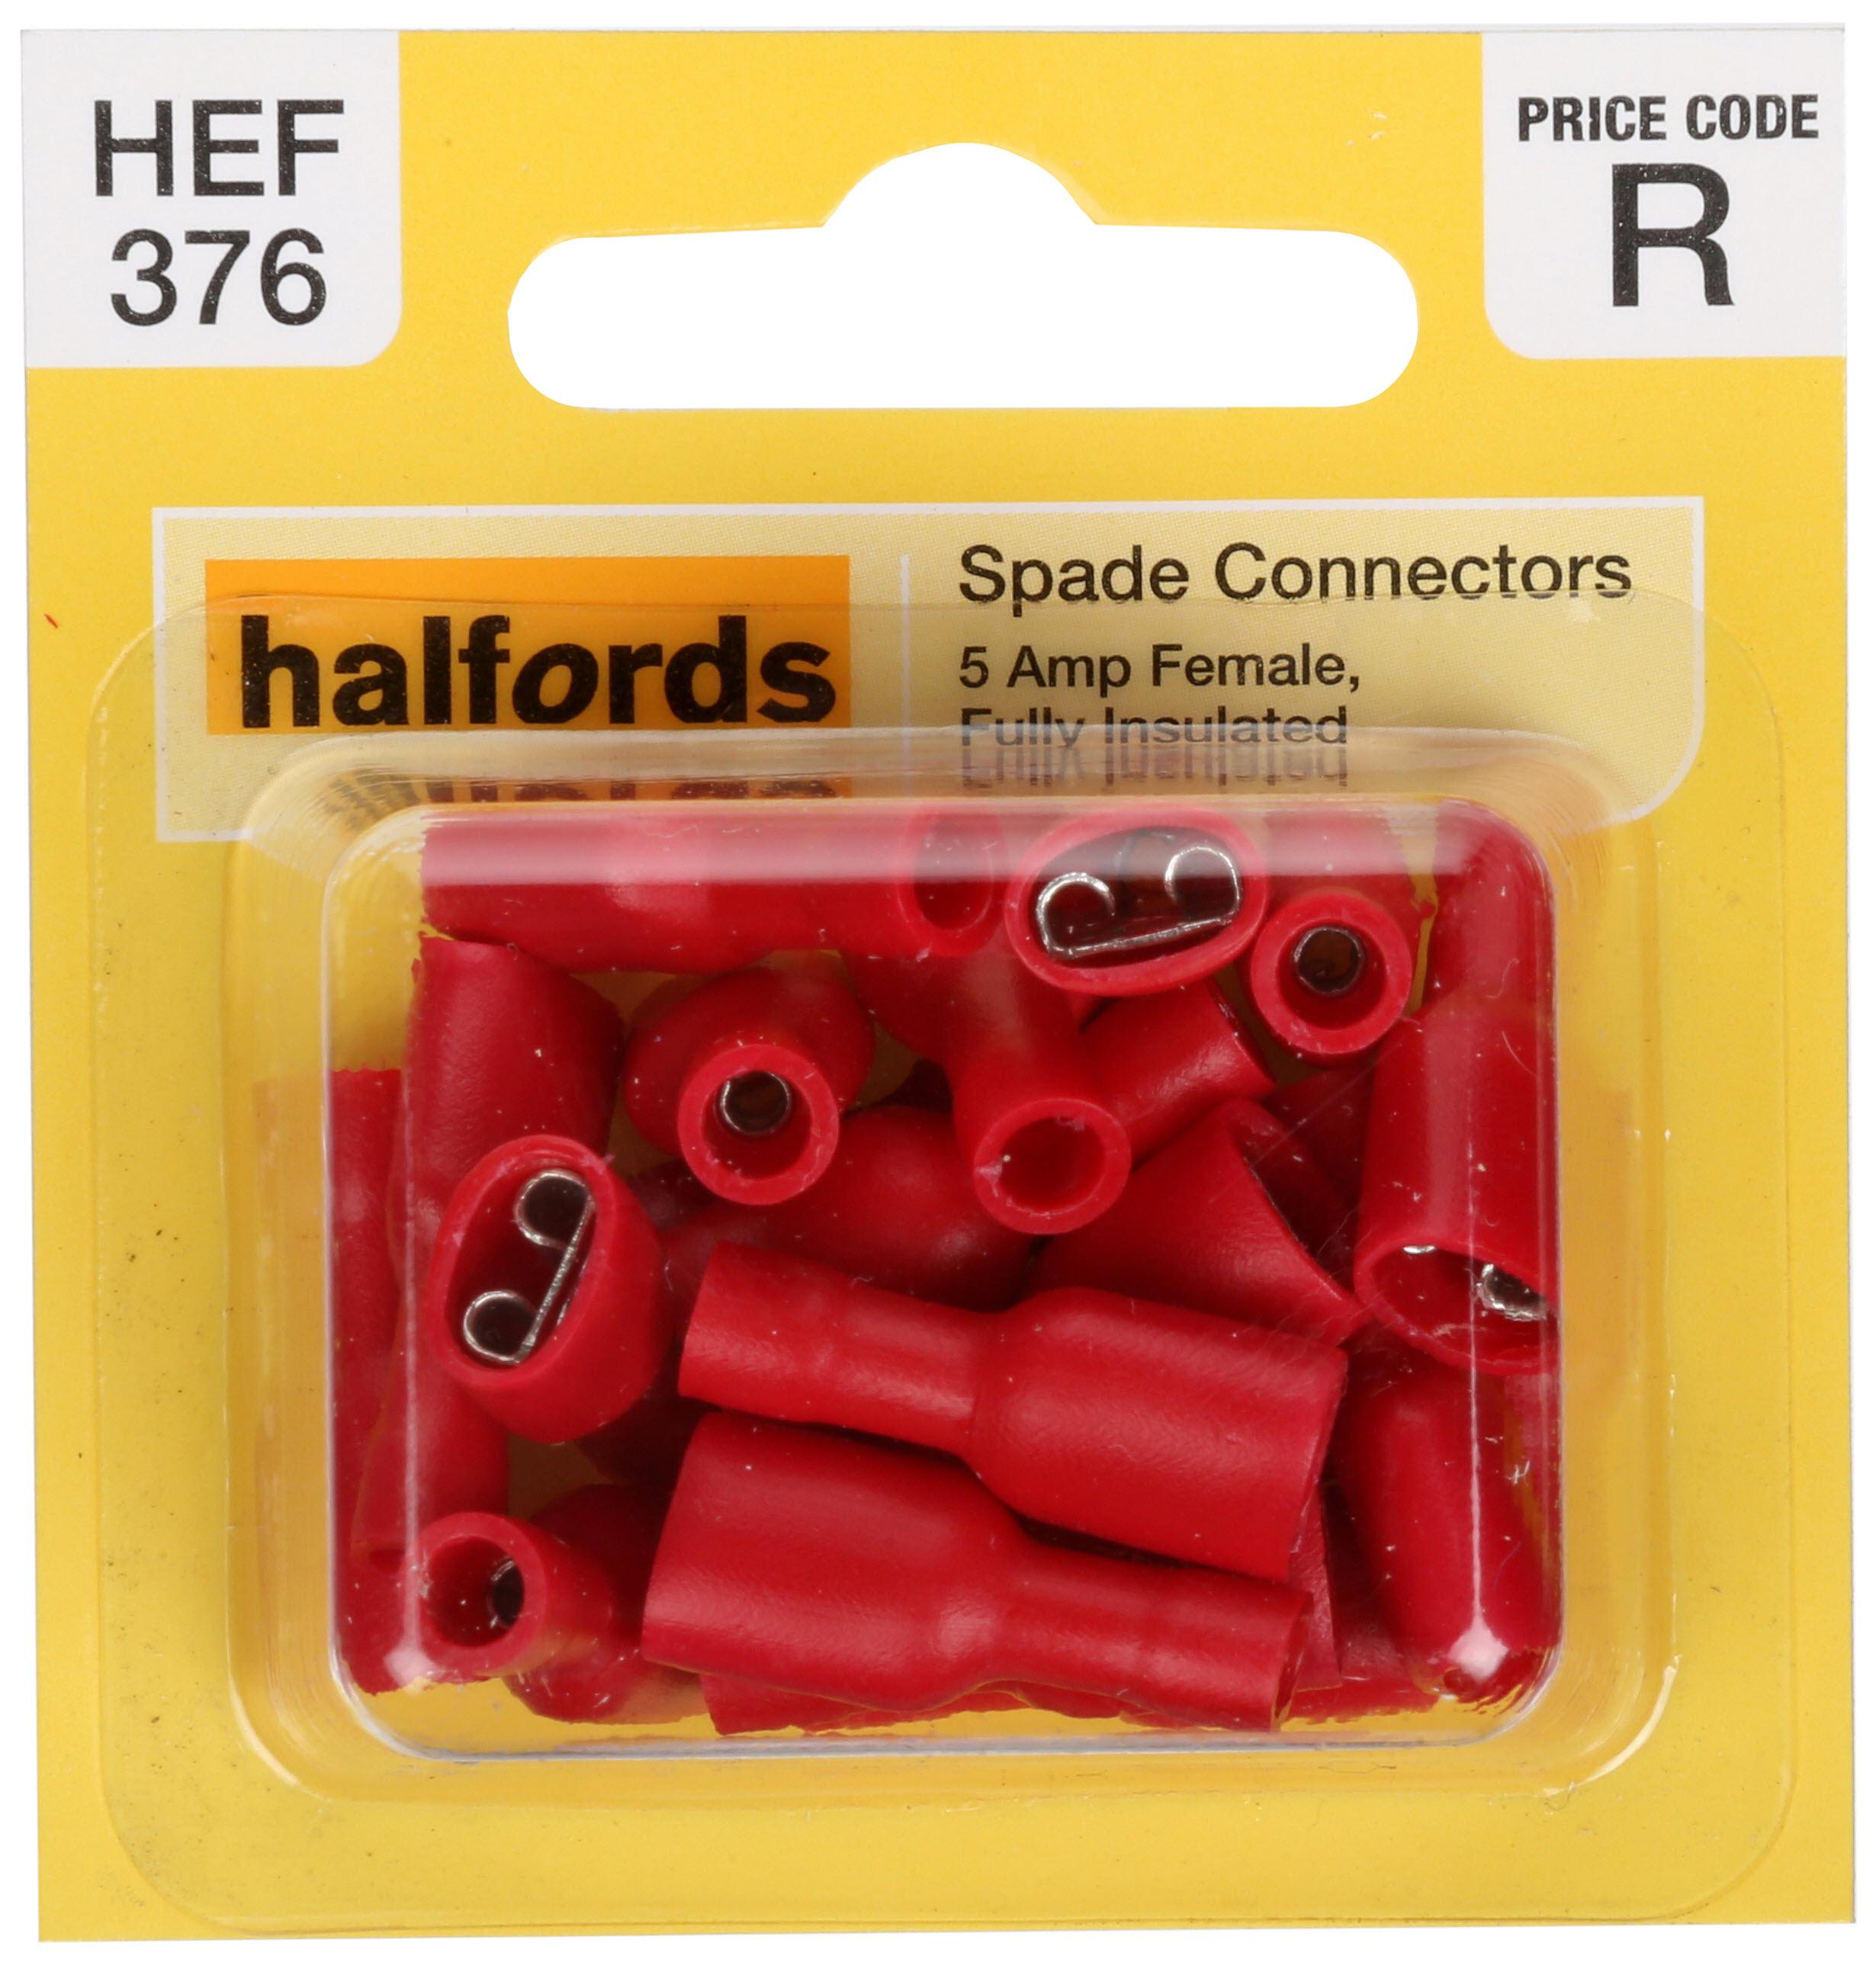 Halfords Spade Connectors 5 Amp Female Fully-Insulated Hef376